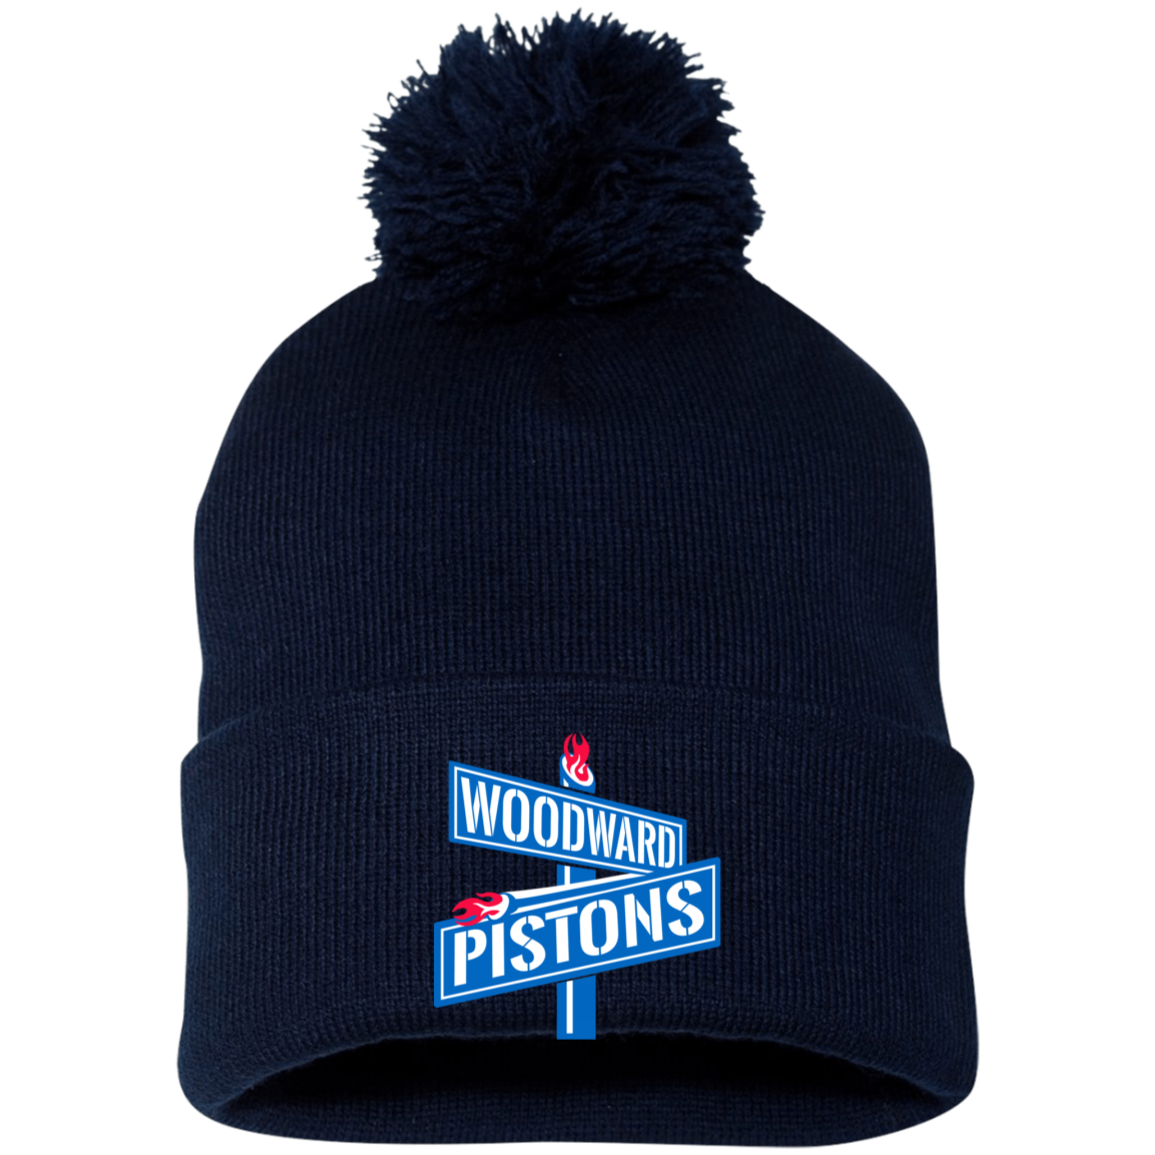 WOODWARD PISTONS Embroidered Pom Pom Knit Cap